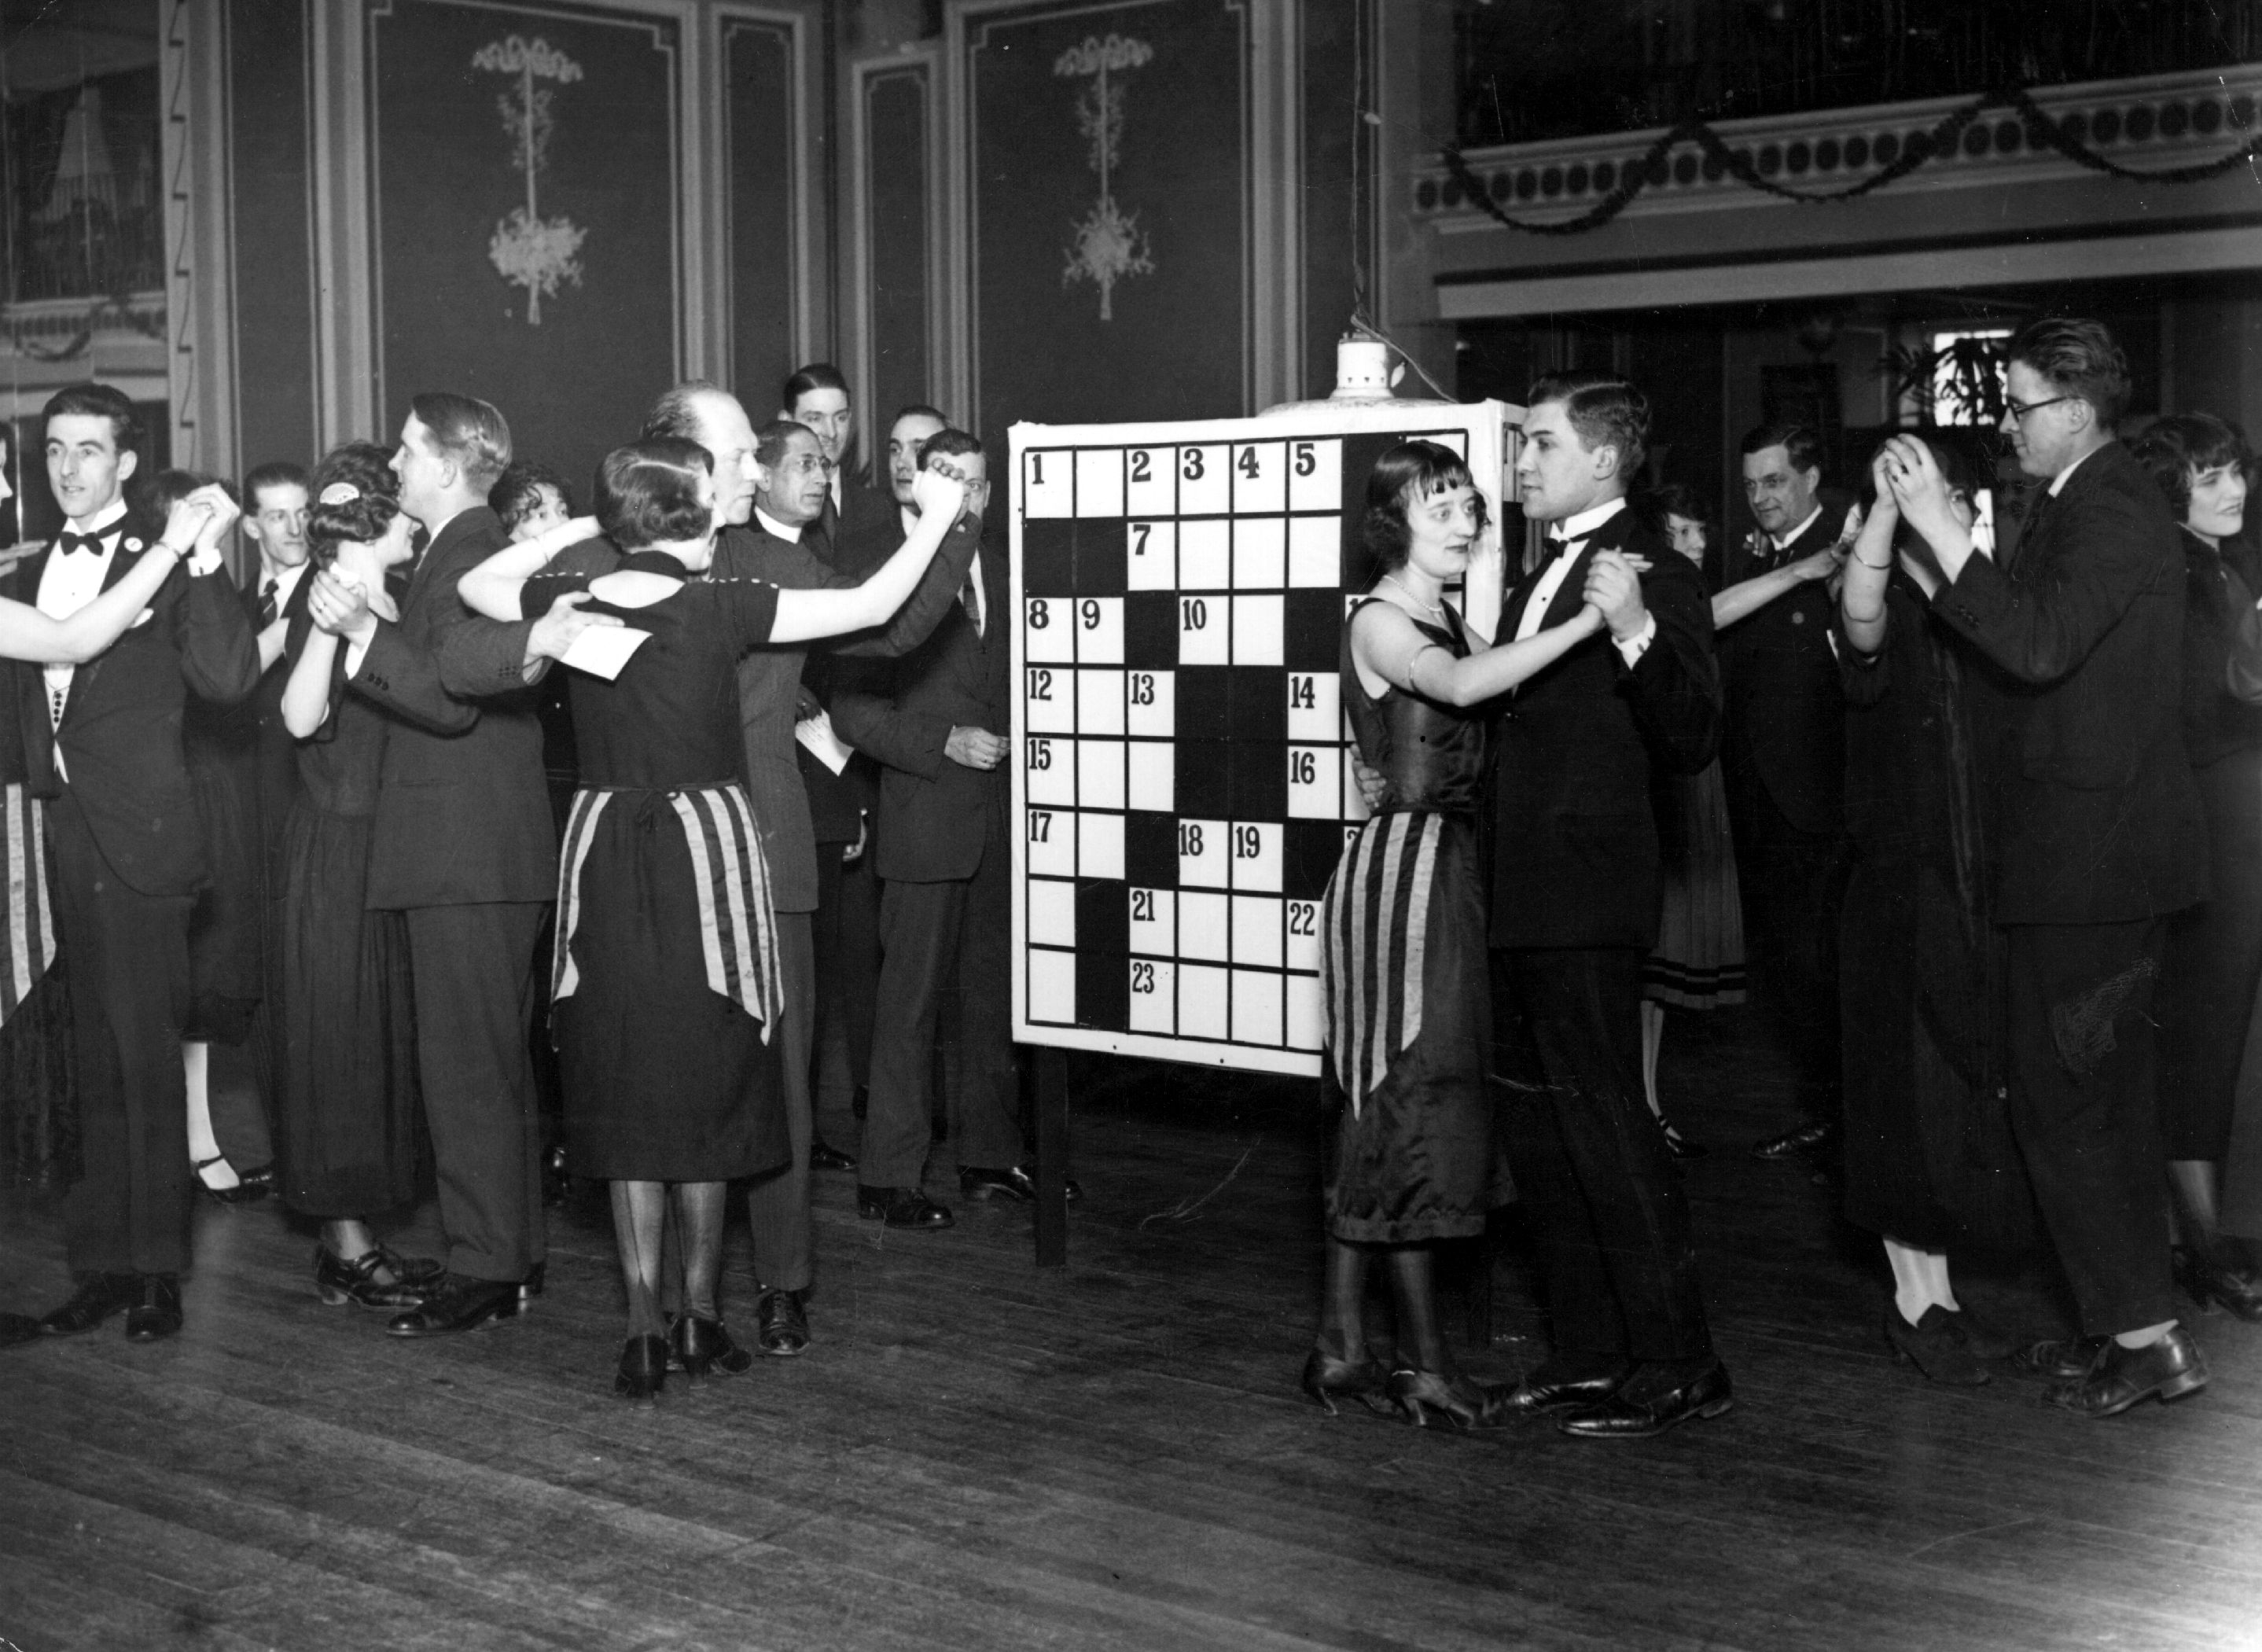 Couples take to the floor in the 'Crossword Puzzle' dance at East Ham Palais de Dance.